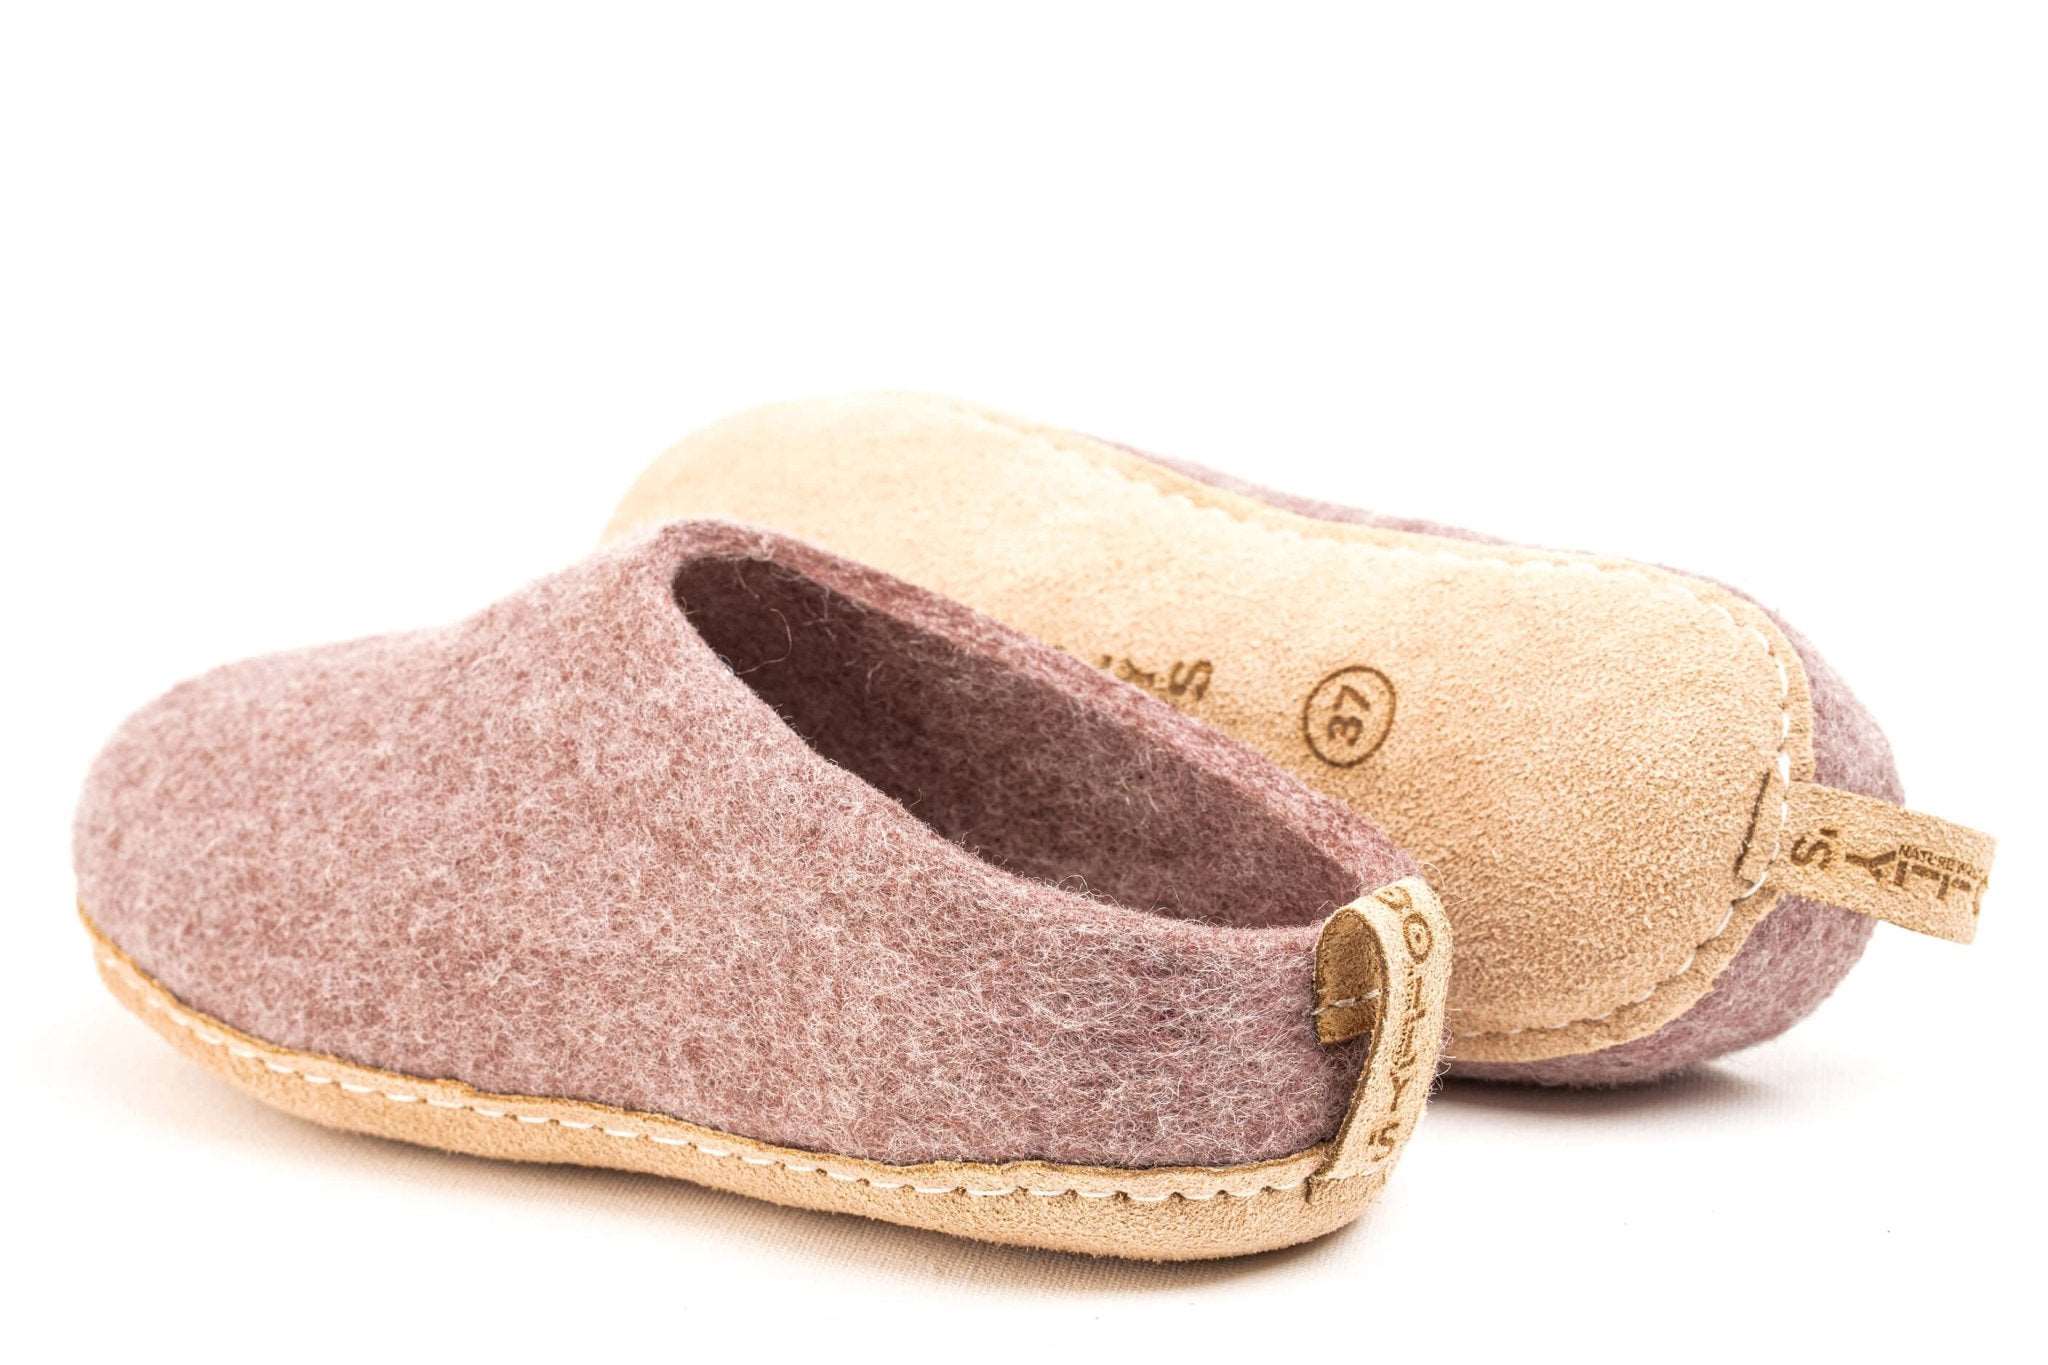 Indoor Open Heel Slippers With Leather Sole - Lavender - Woollyes